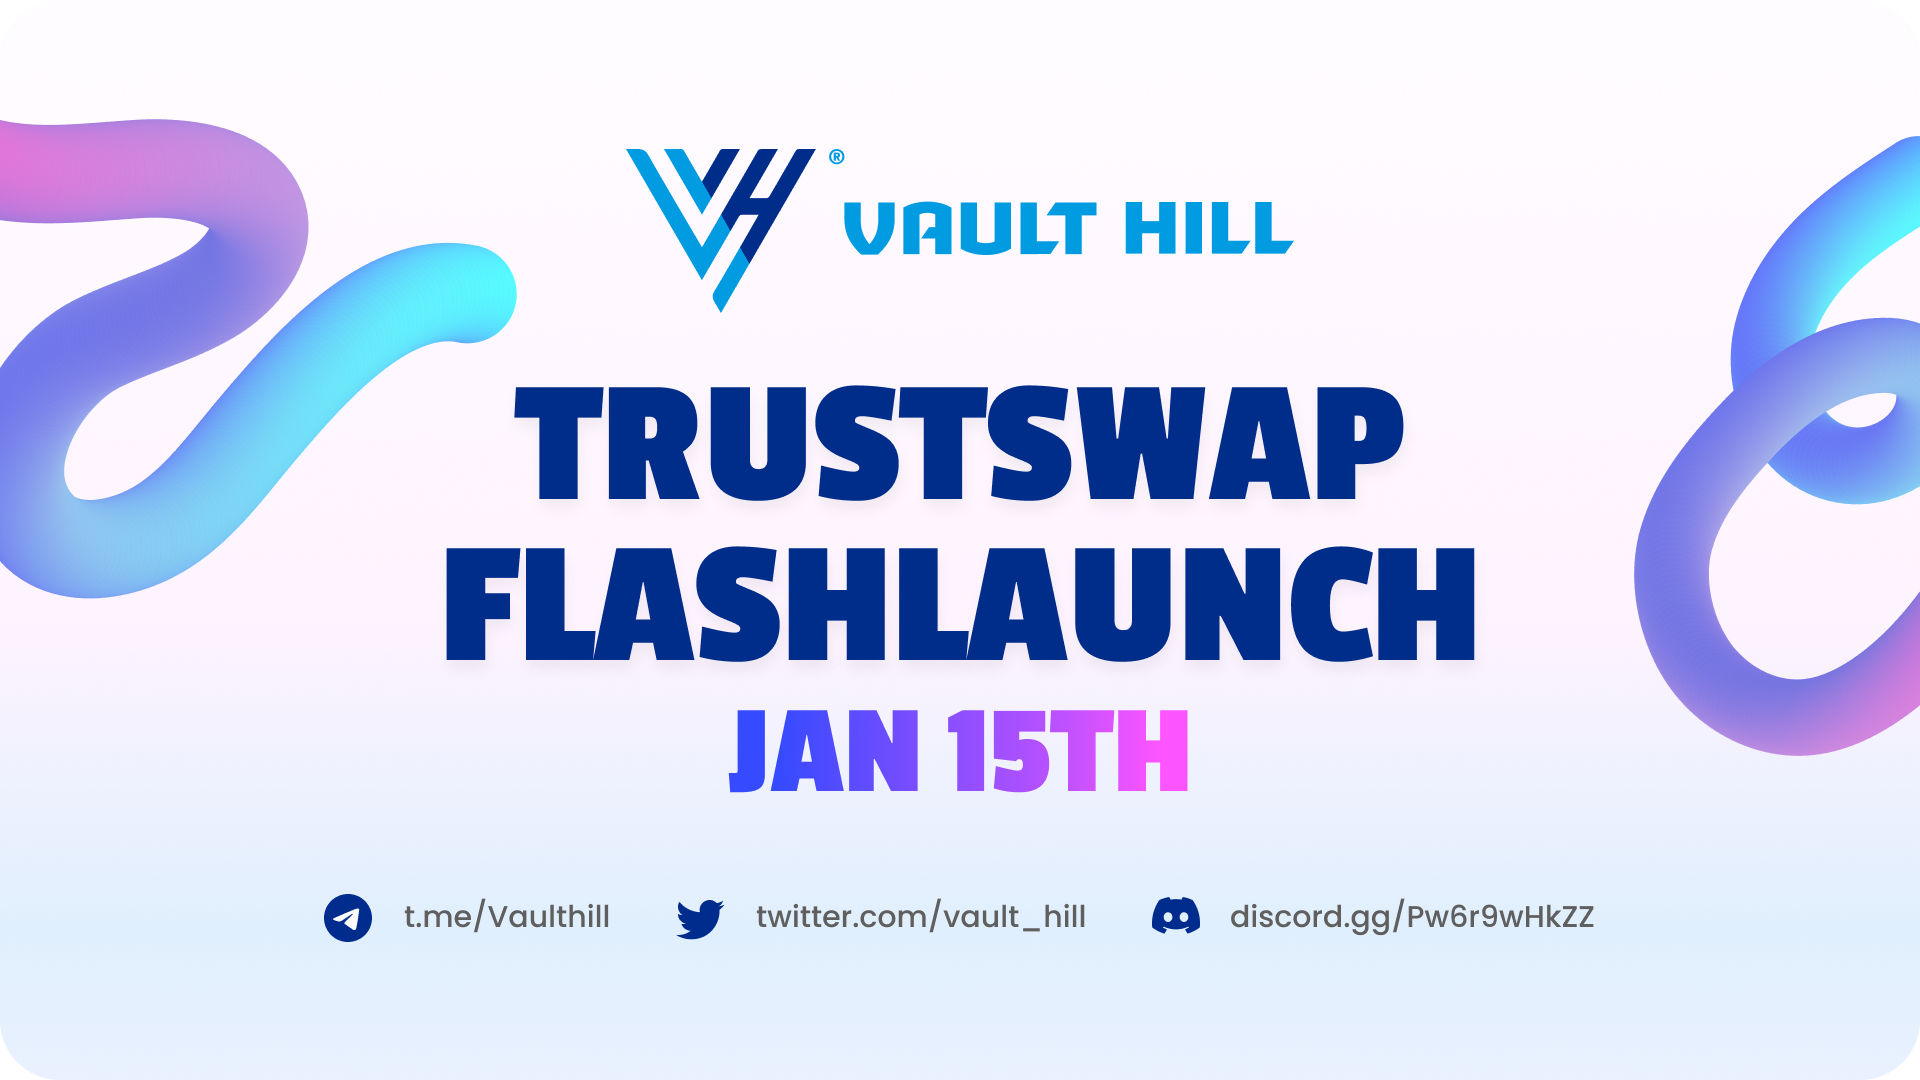 Vault Hill Announces January 15th FlashLaunch With TrustSwap